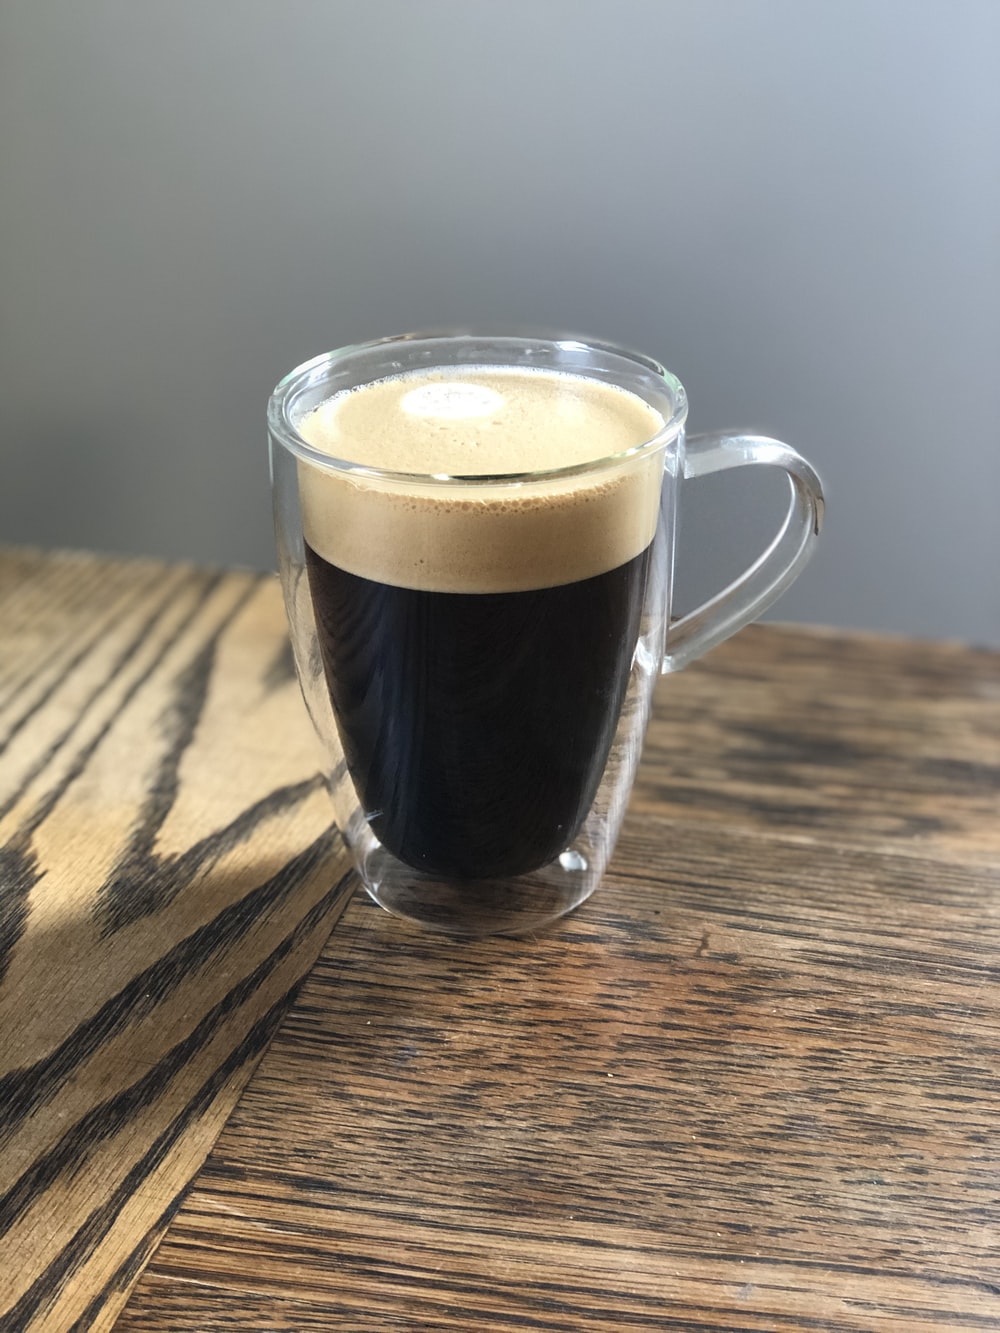 Americano Coffee Picture. Download Free Image